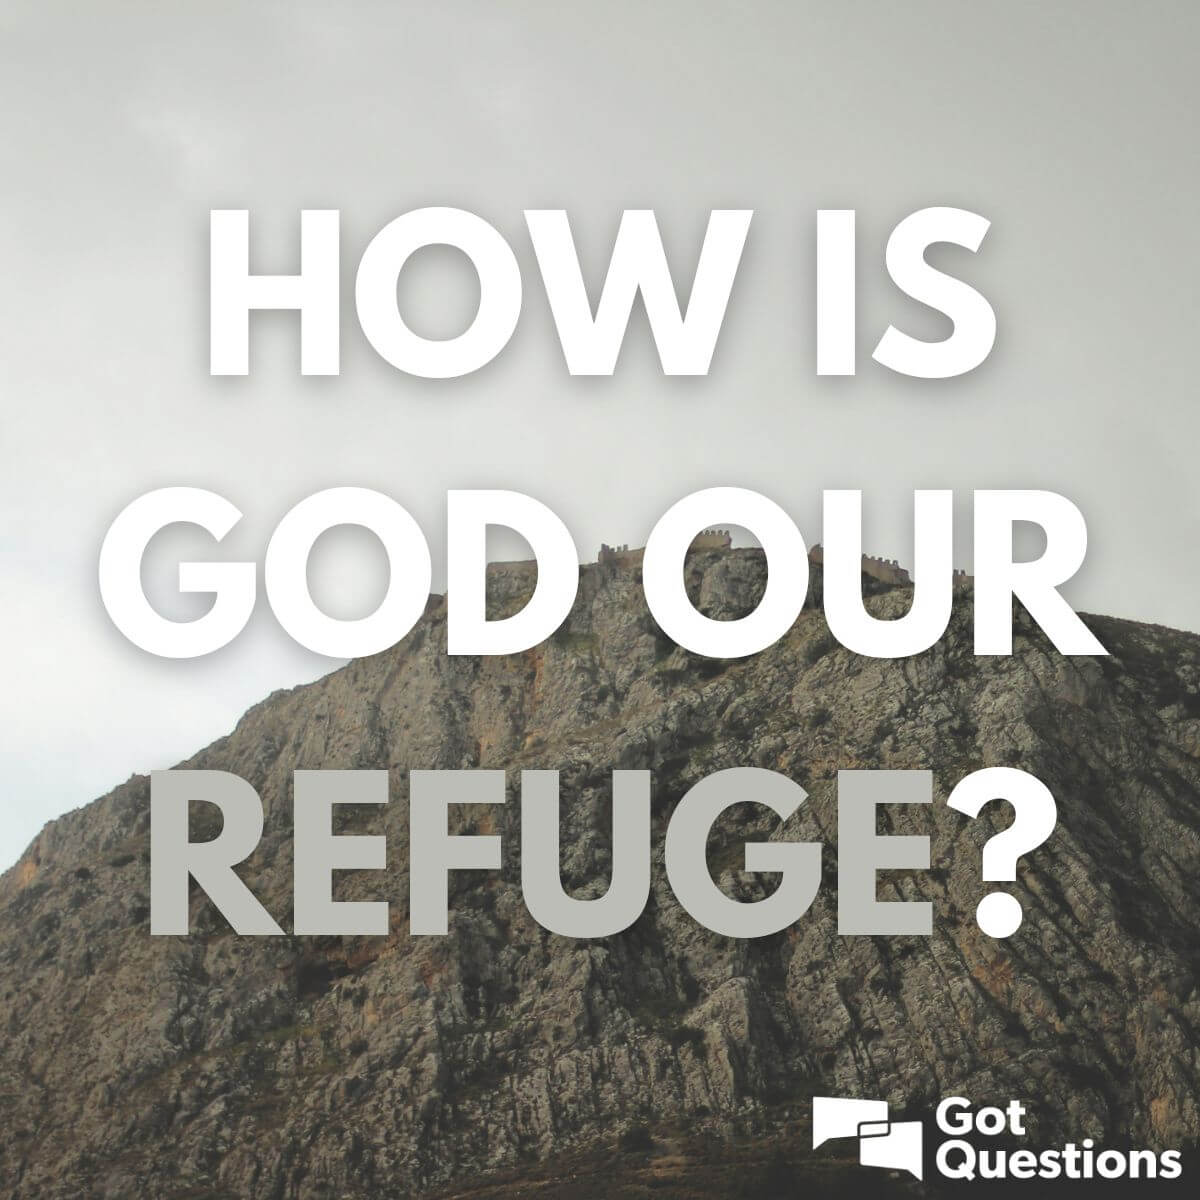 Meaning of refuge and fortress